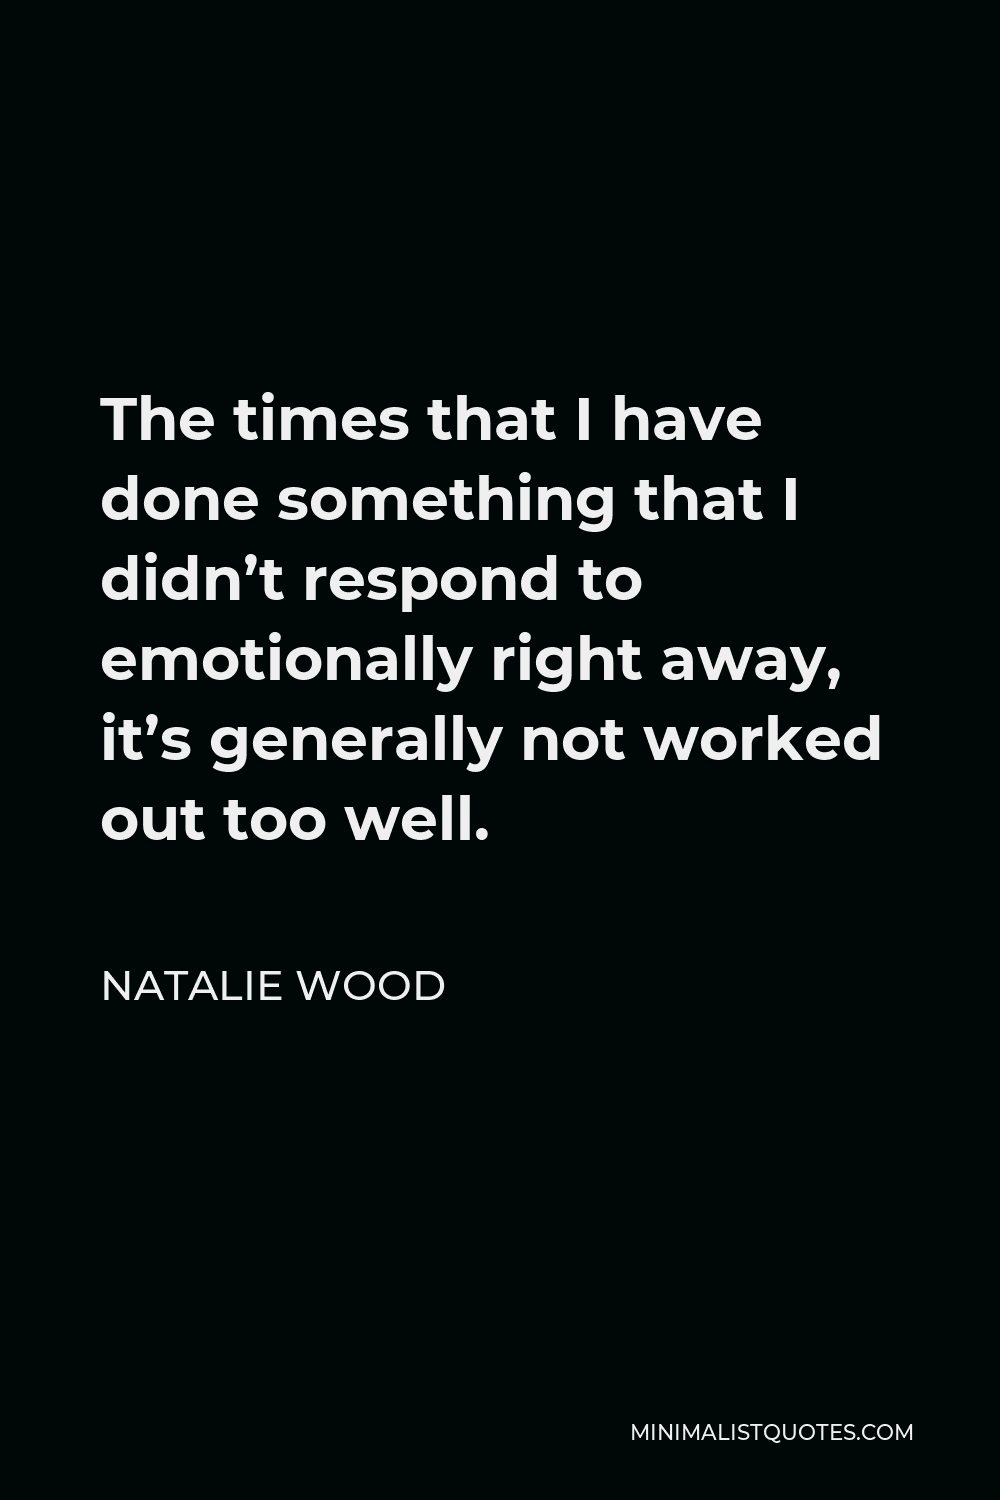 Natalie Wood Quote - The times that I have done something that I didn’t respond to emotionally right away, it’s generally not worked out too well.